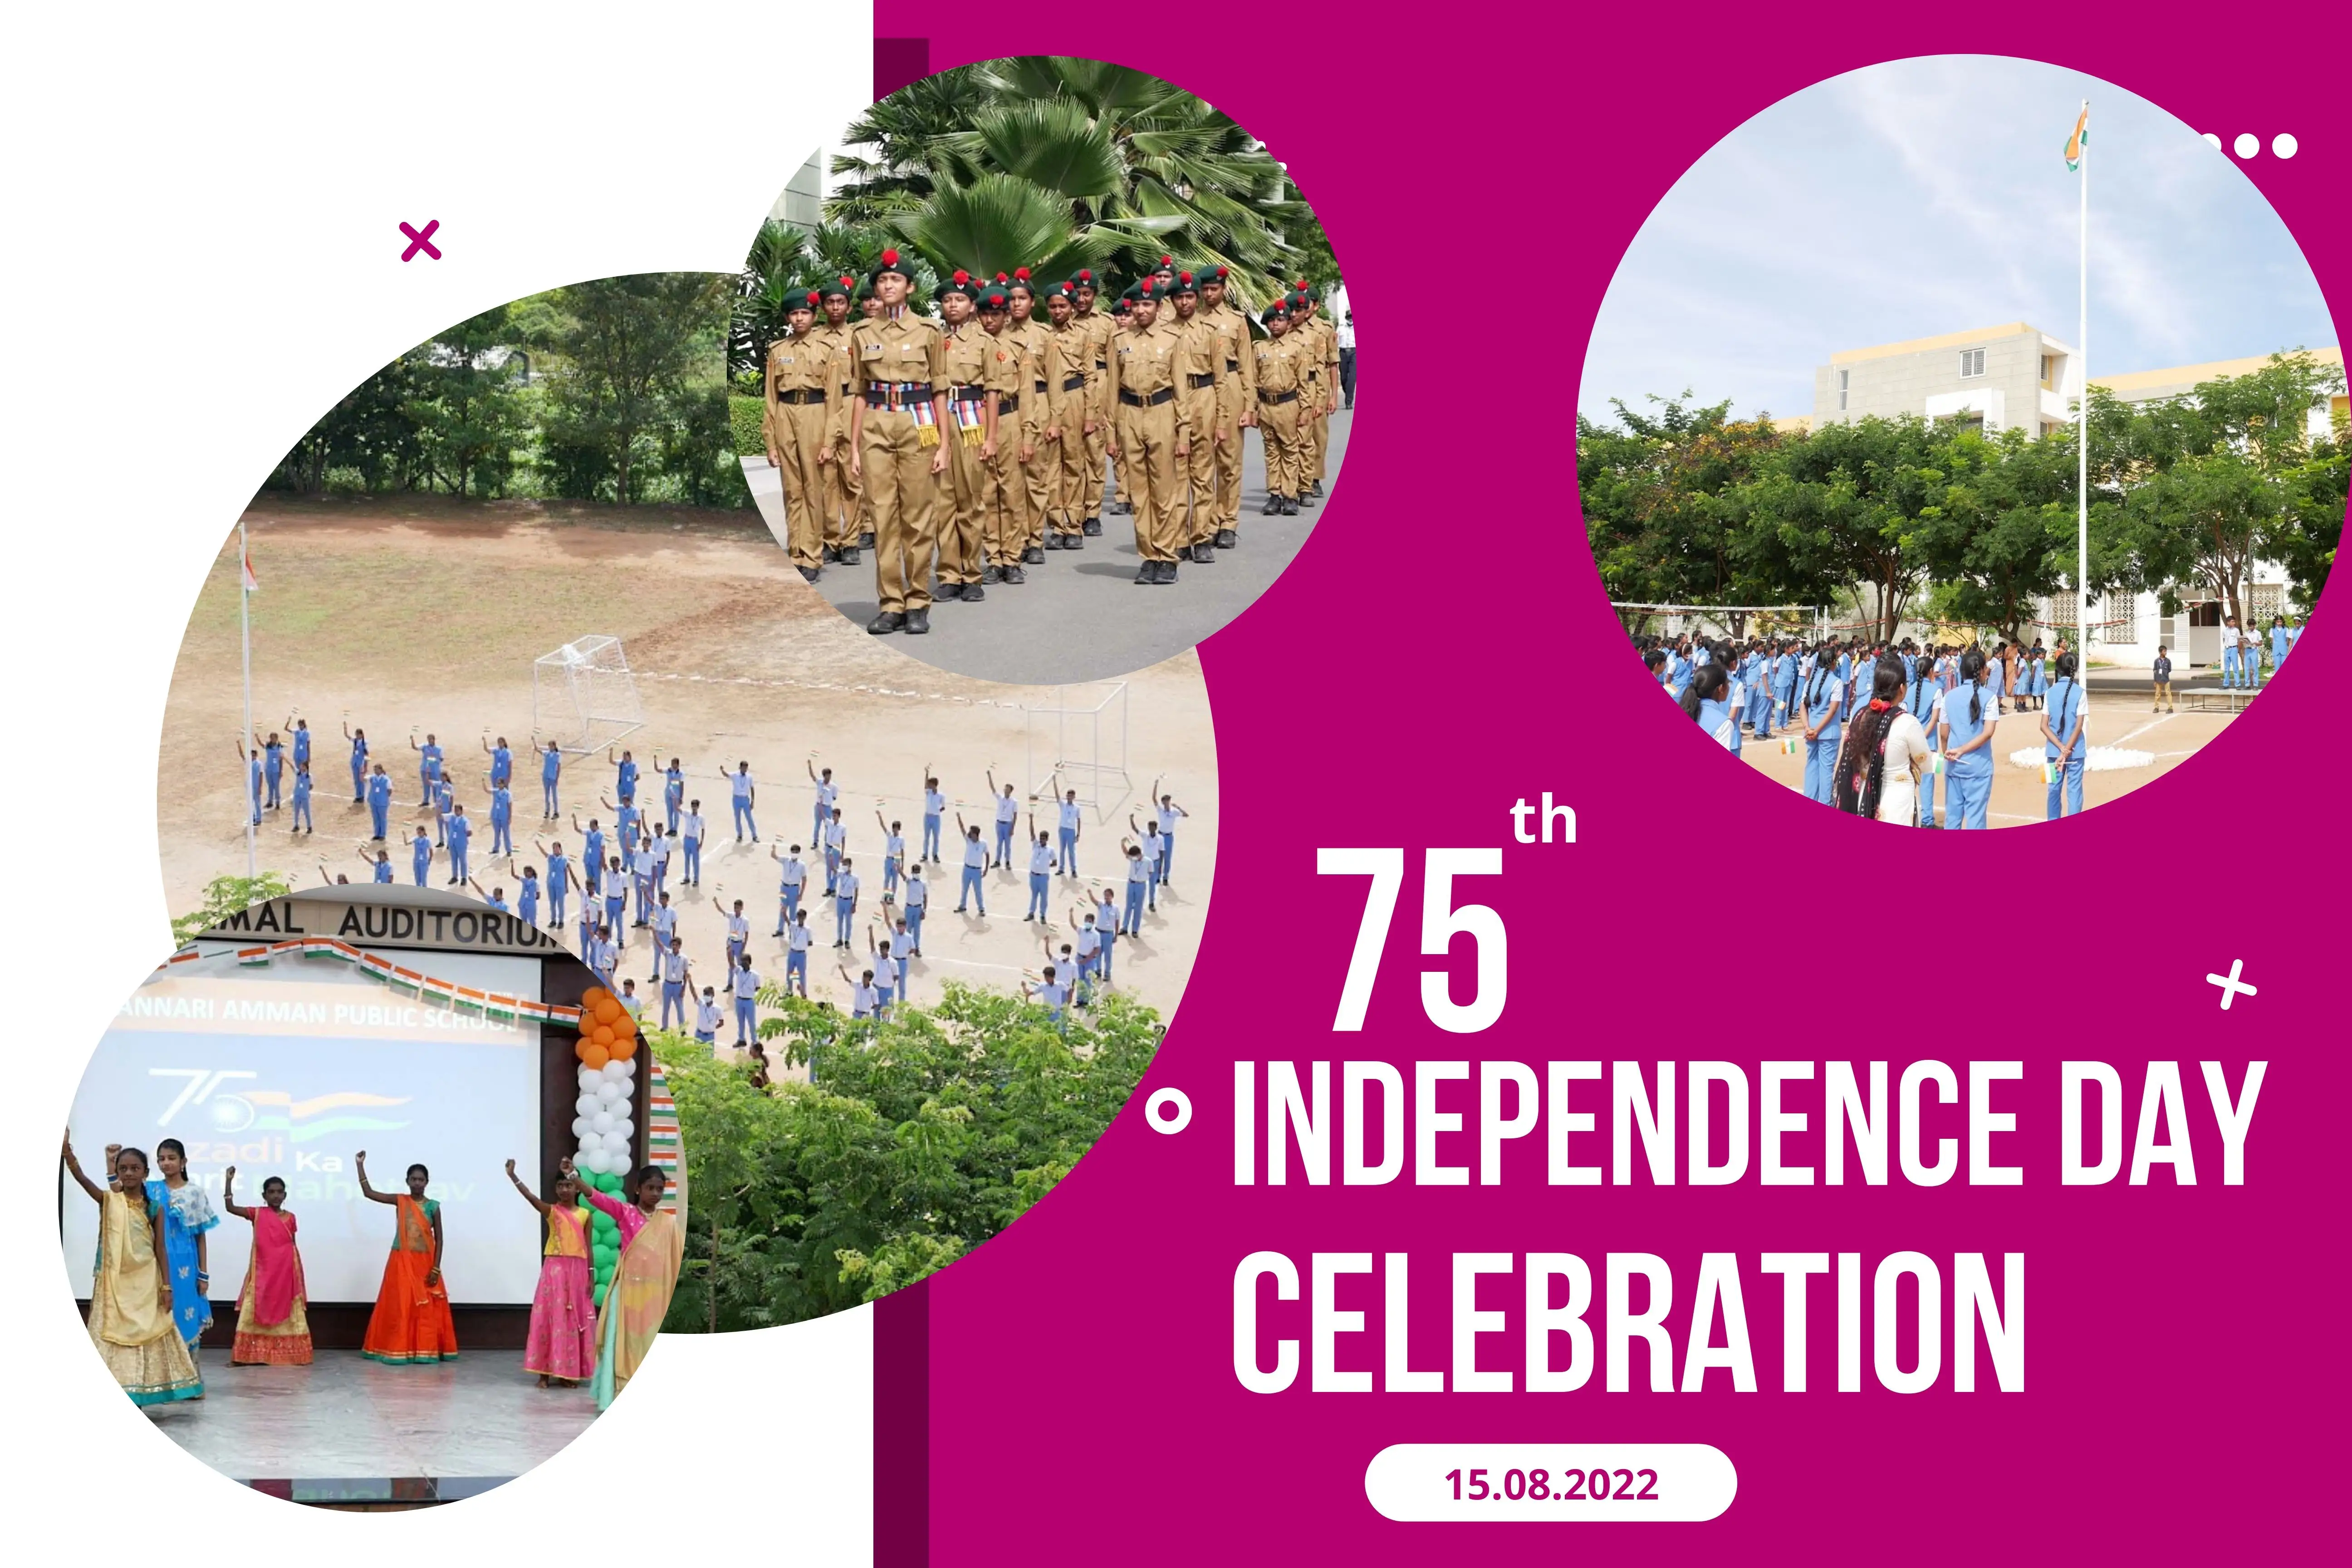 75TH INDEPENDENCE DAY CELEBRATION